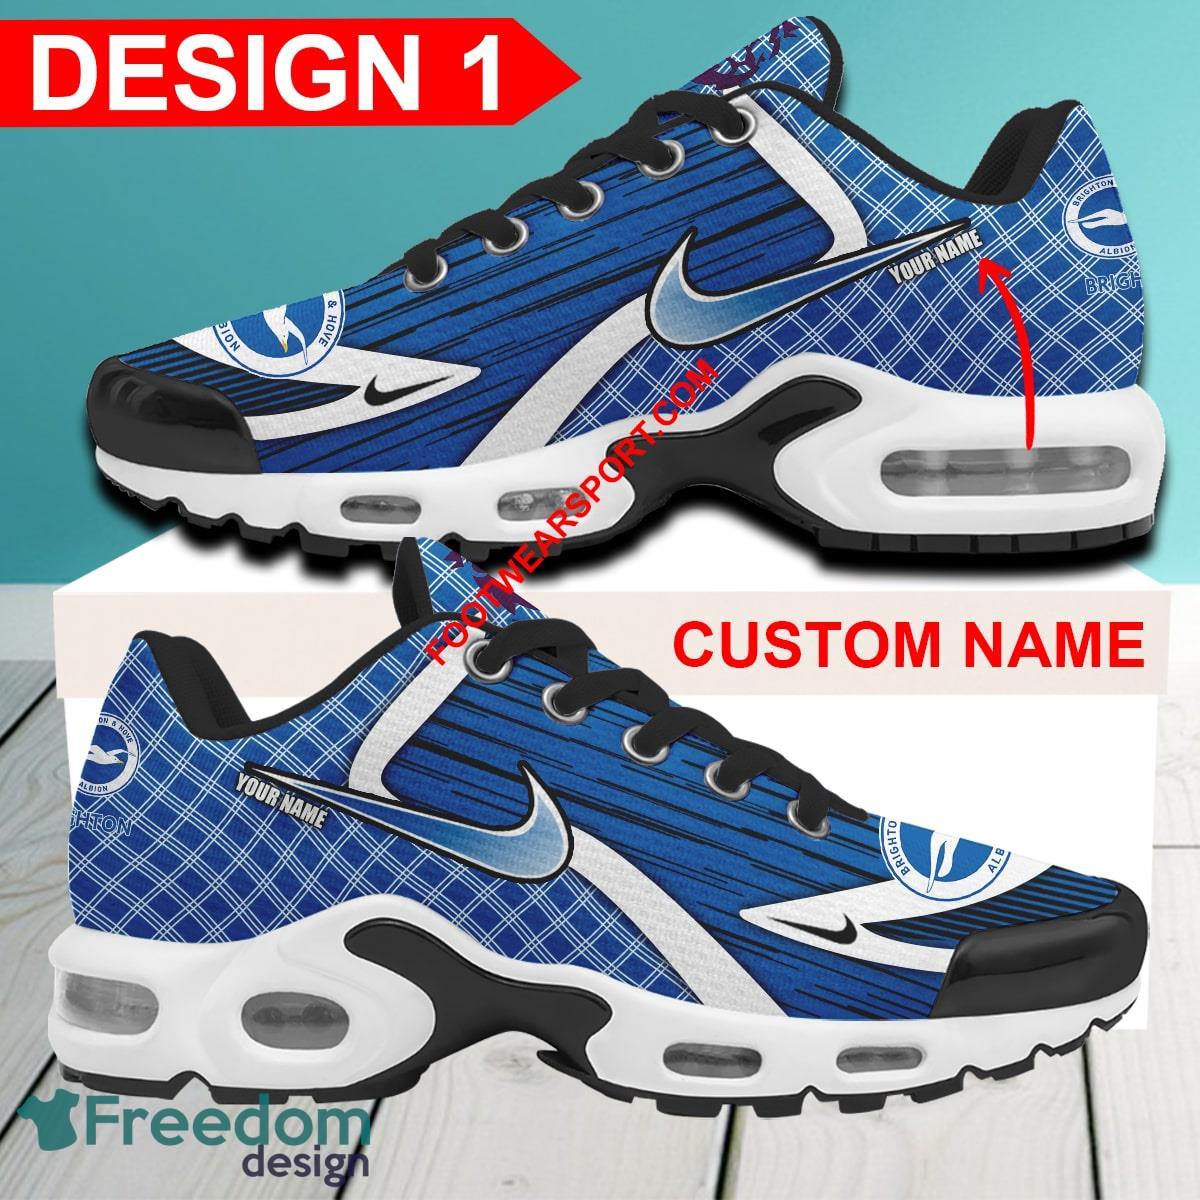 Custom Name EPL Brighton & Hove Albion Air Cushion Sport Shoes TN Sneakers Gift Sneakers Fans - EPL Brighton & Hove Albion Air Cushion Sport Shoes Style 1 TN Sneakers